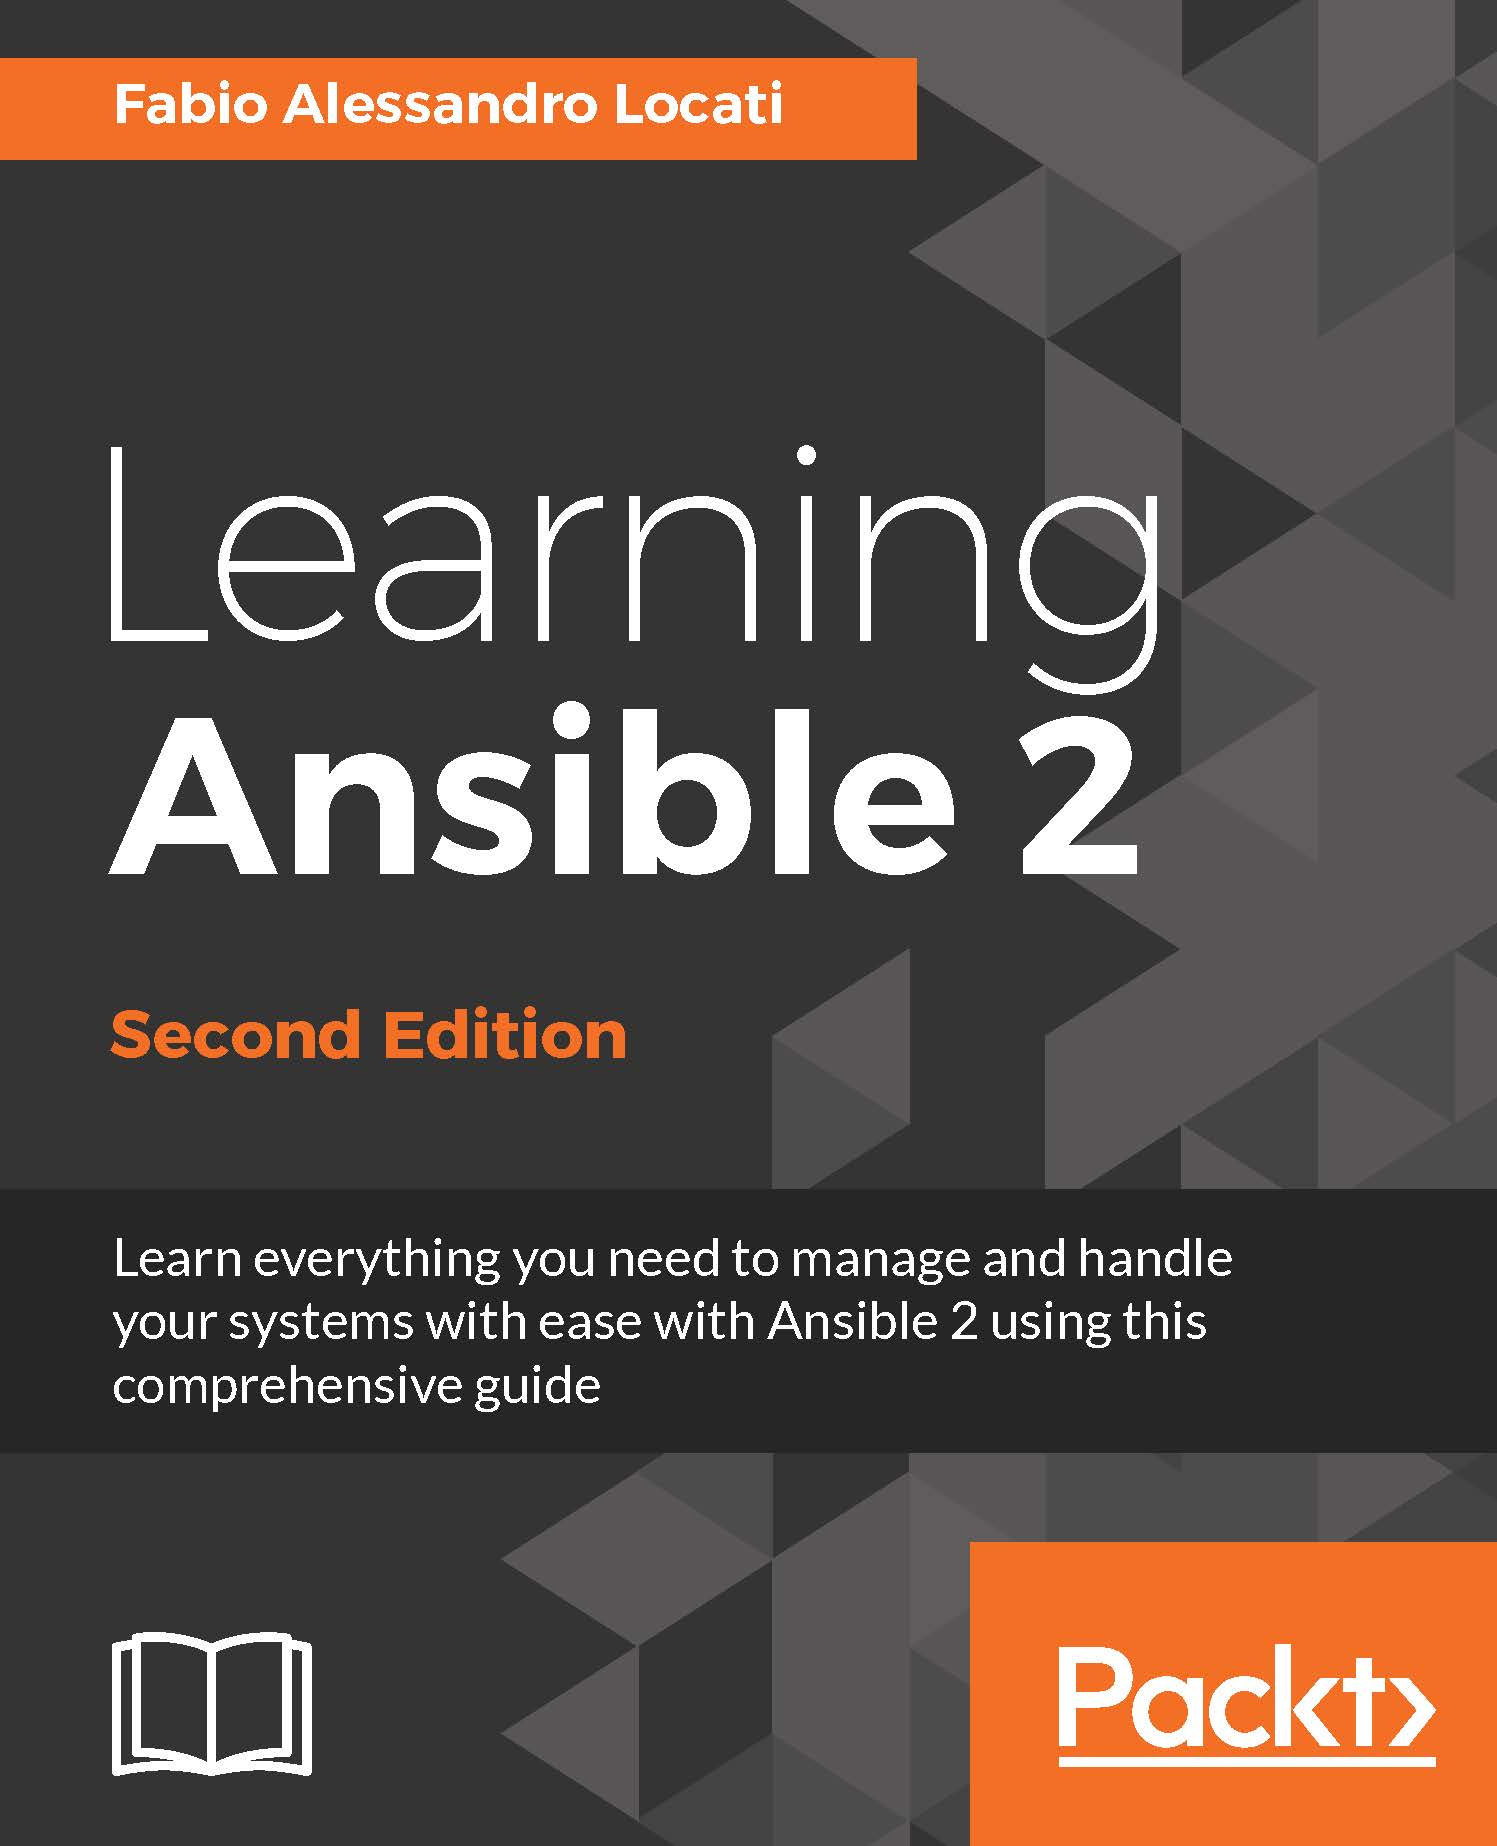 Learning Ansible 2